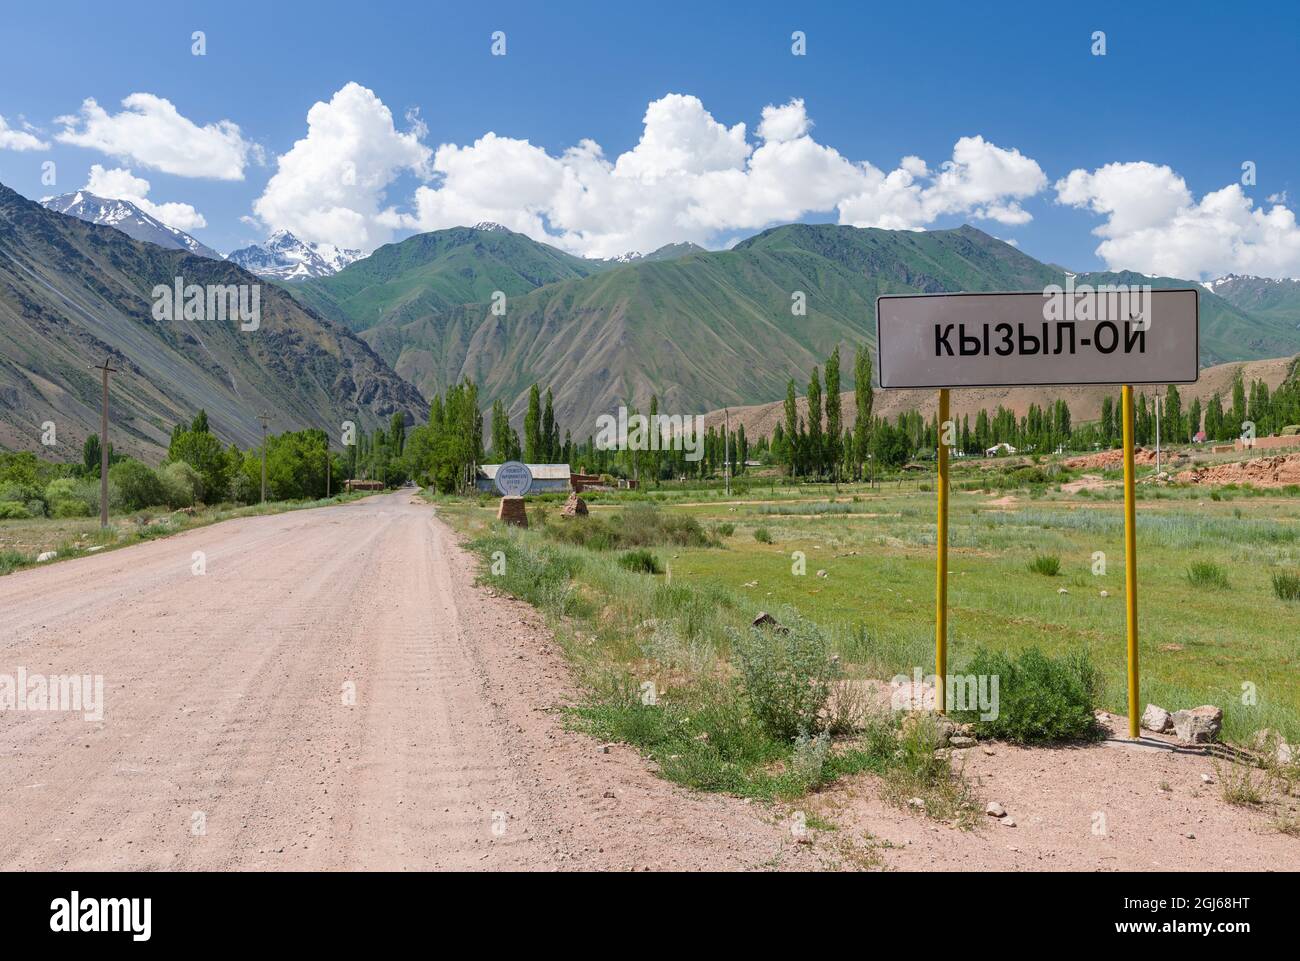 Village Kyzyl-Oy. Valley of river Suusamyr in the Tien Shan Mountains, Kyrgyzstan Stock Photo